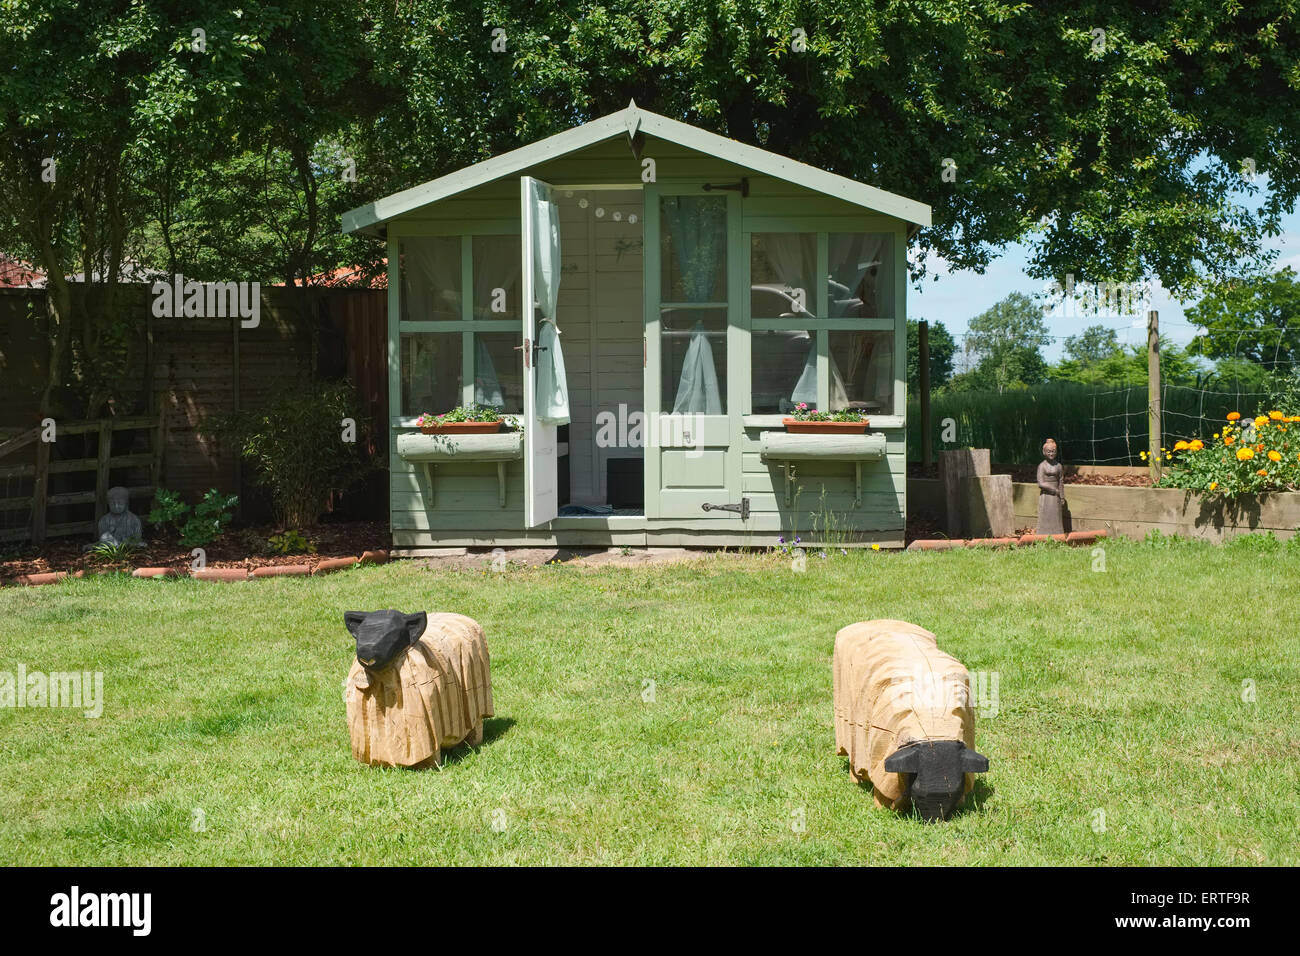 Summer House in Garden with Two Carved Wooden Sheep on Lawn Stock Photo